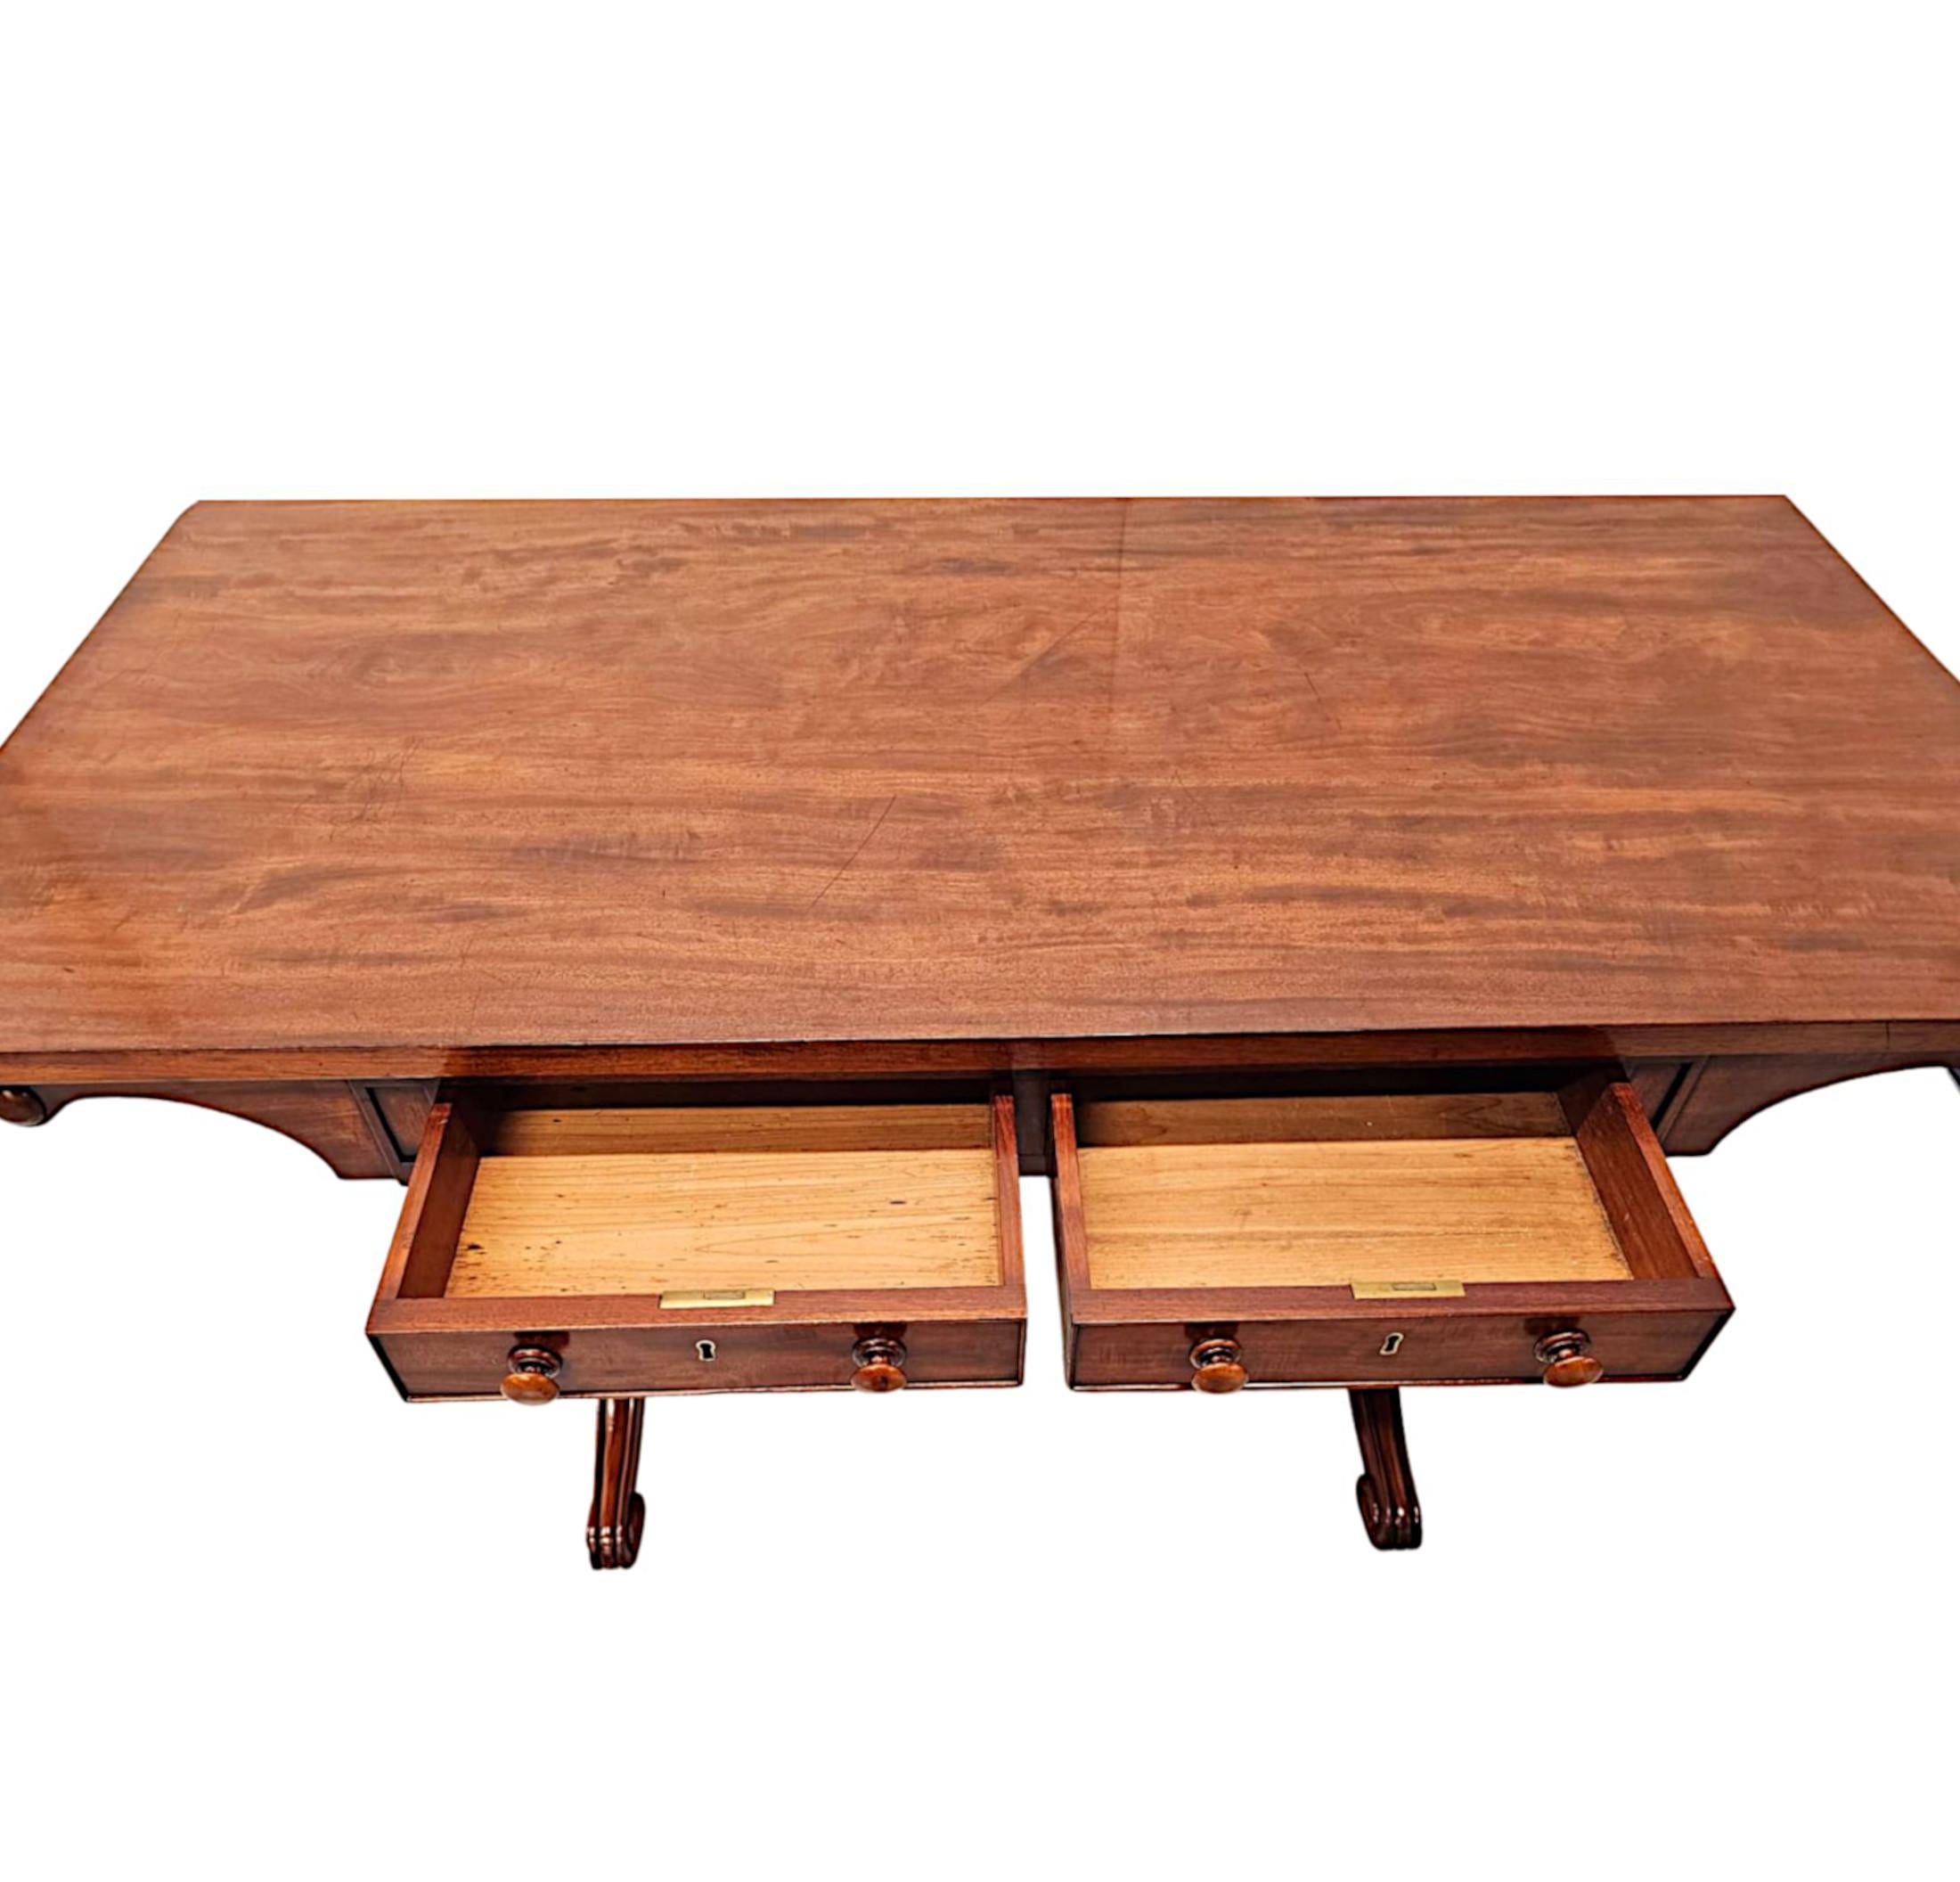  A  Fine 19th Century Irish Library Table Attributed to Gillingtons of Dublin For Sale 2